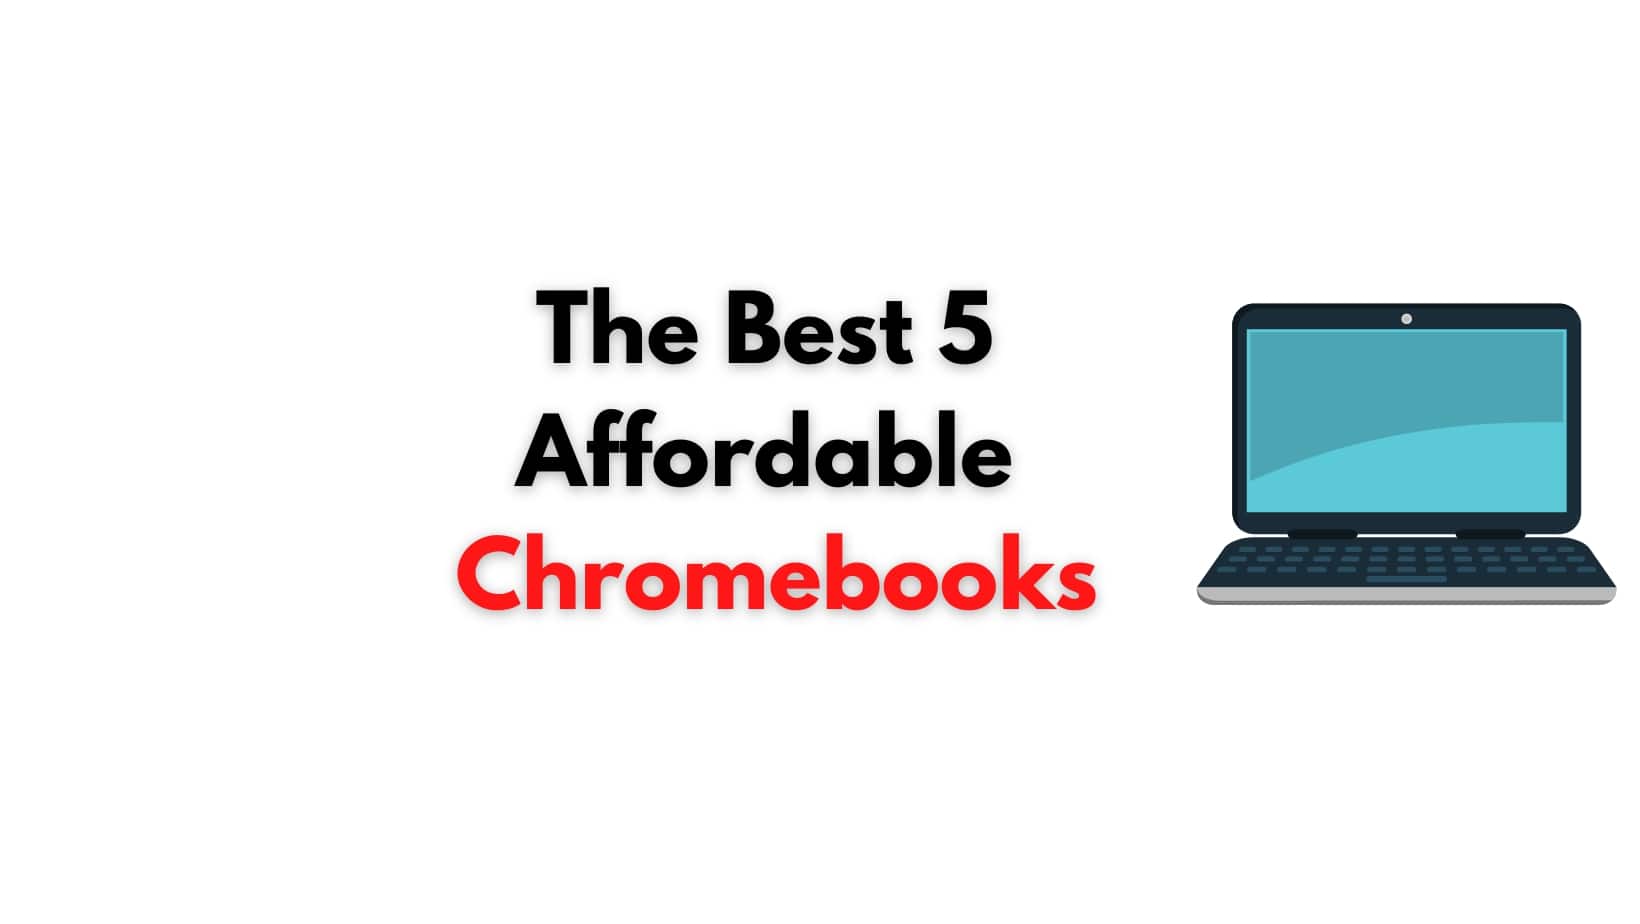 The Best 5 Affordable Chromebooks for Back-to-School or Distance Learning